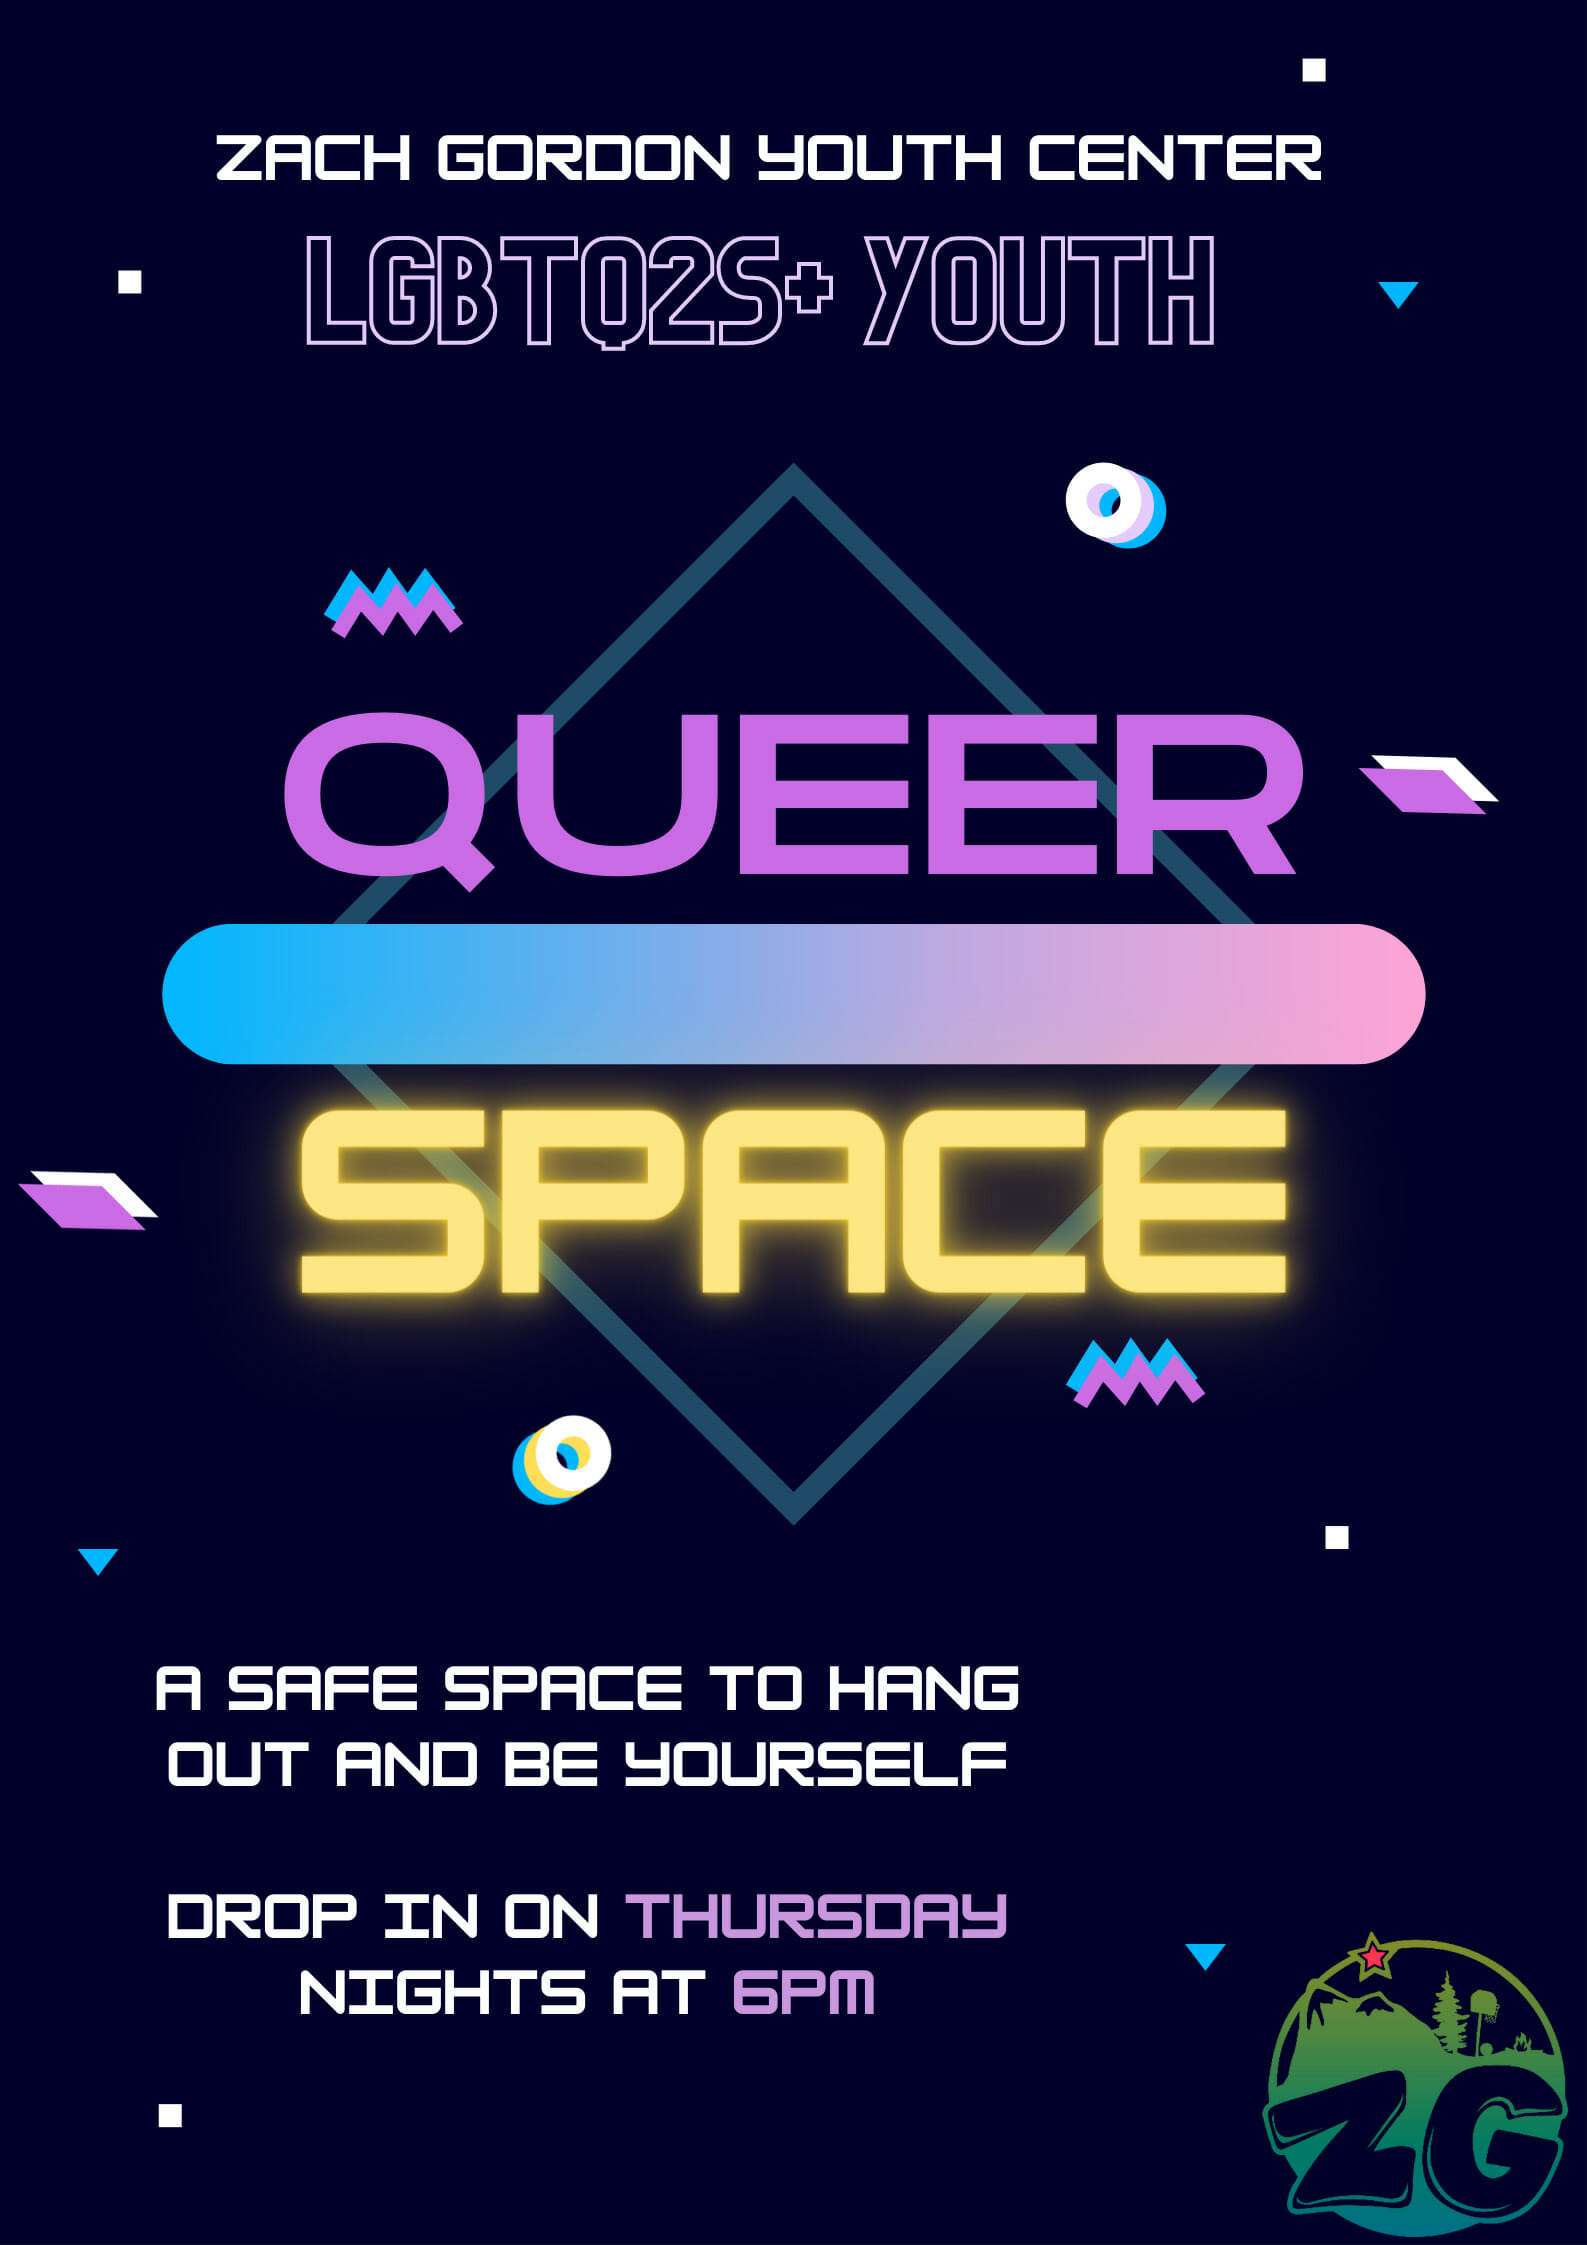 Queerspace Thursdays at 6